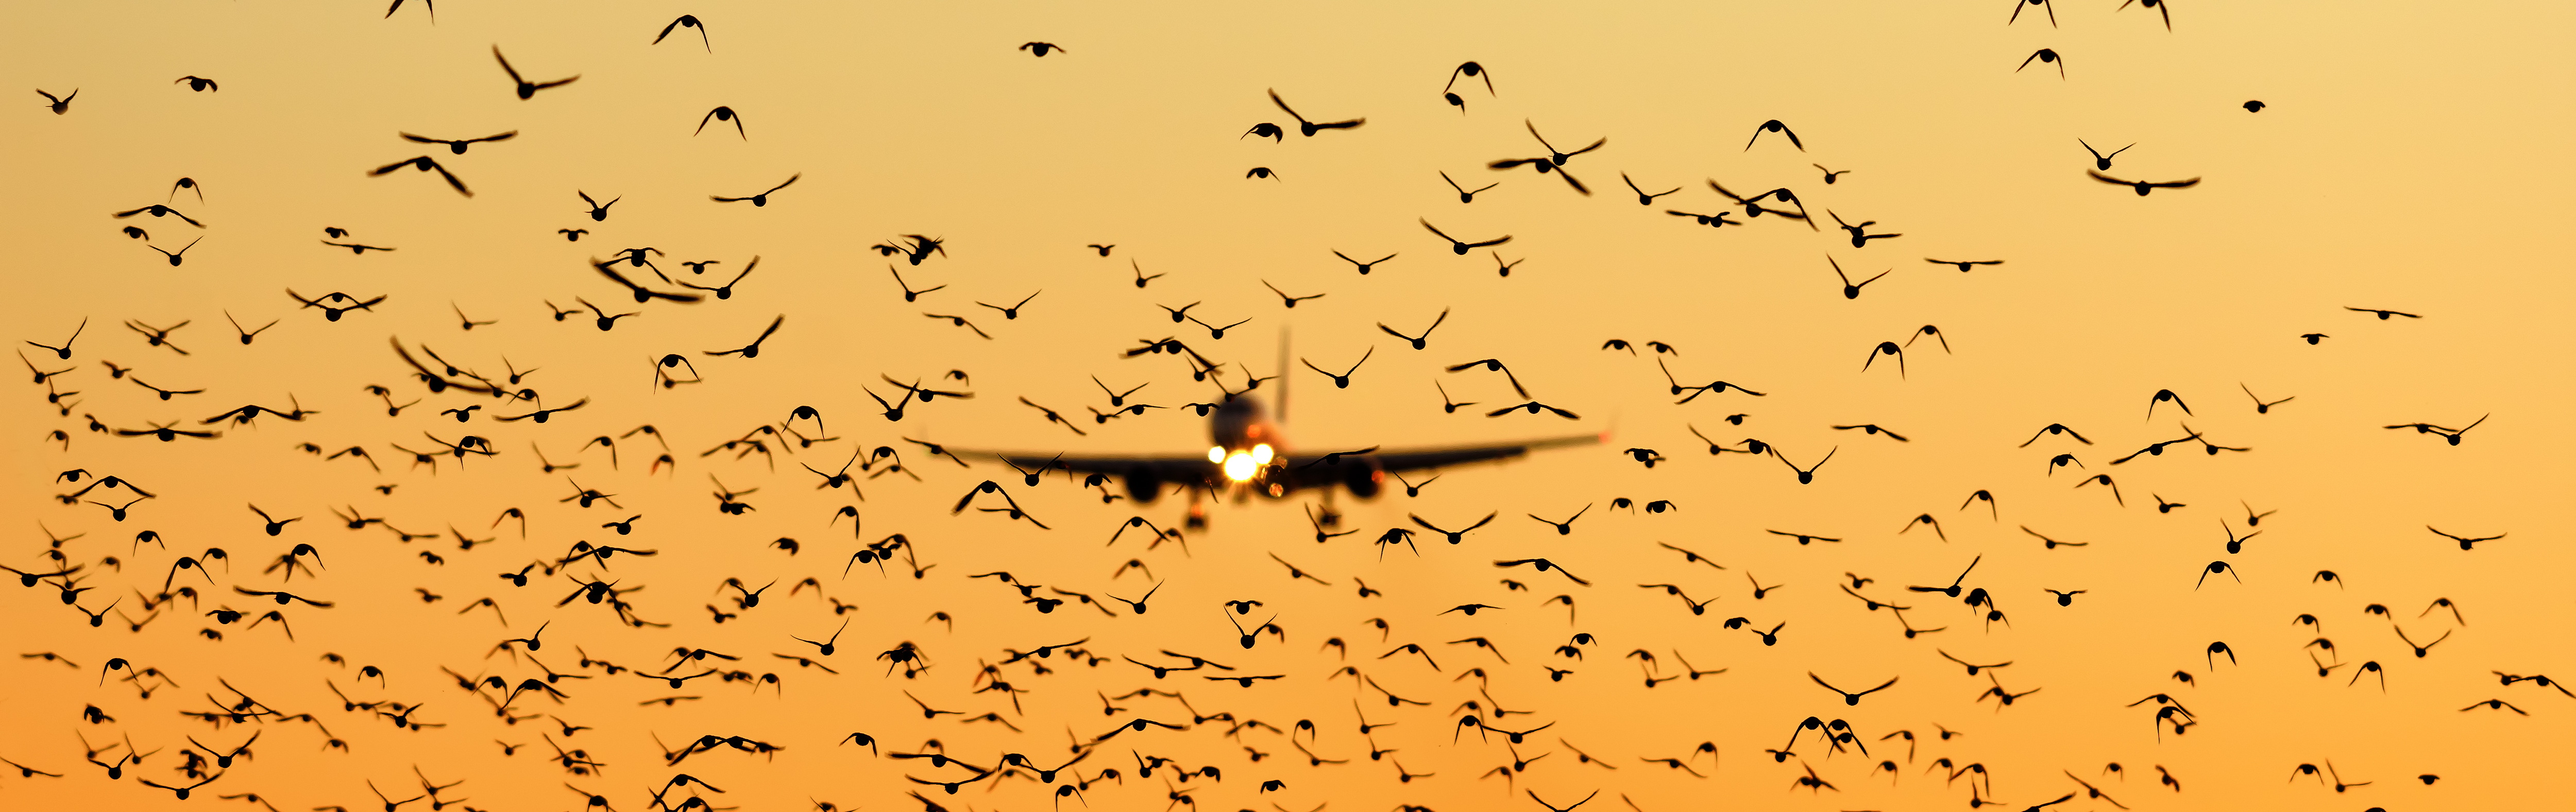 A passenger plane approaching, a flock of birds in front of it.